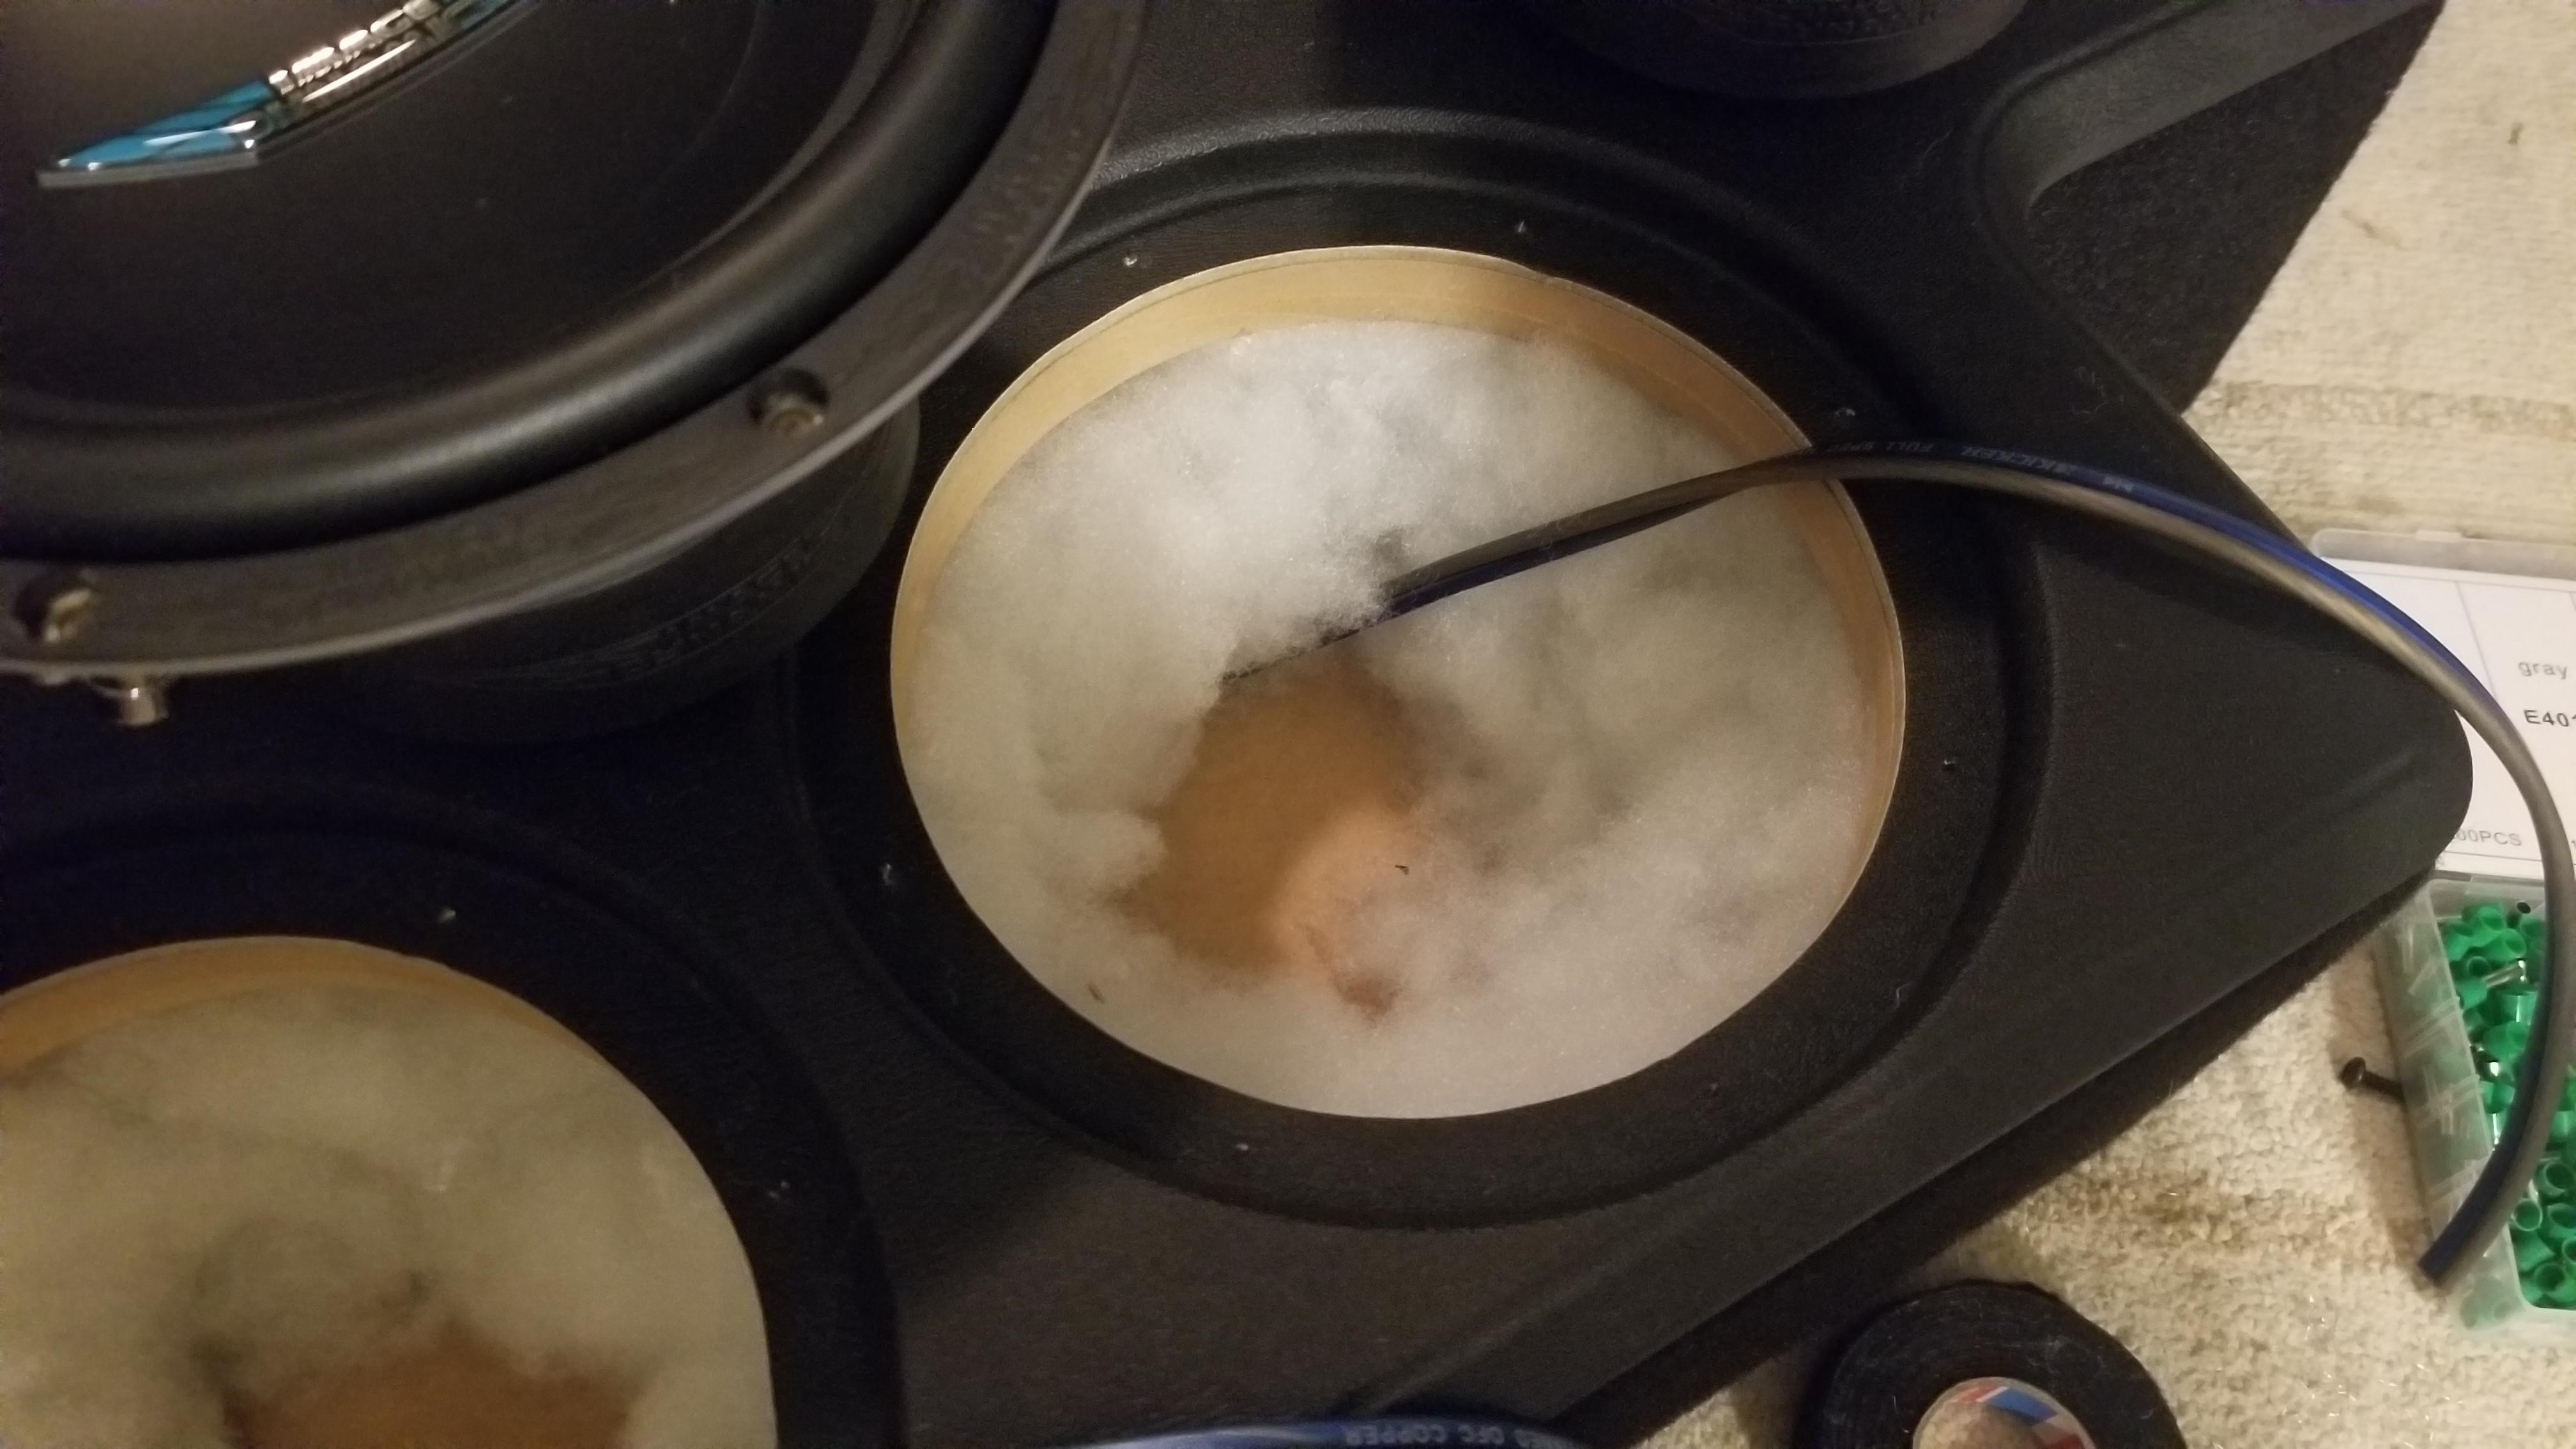 Is there a certain amount of fill needed for a given box and speaker size